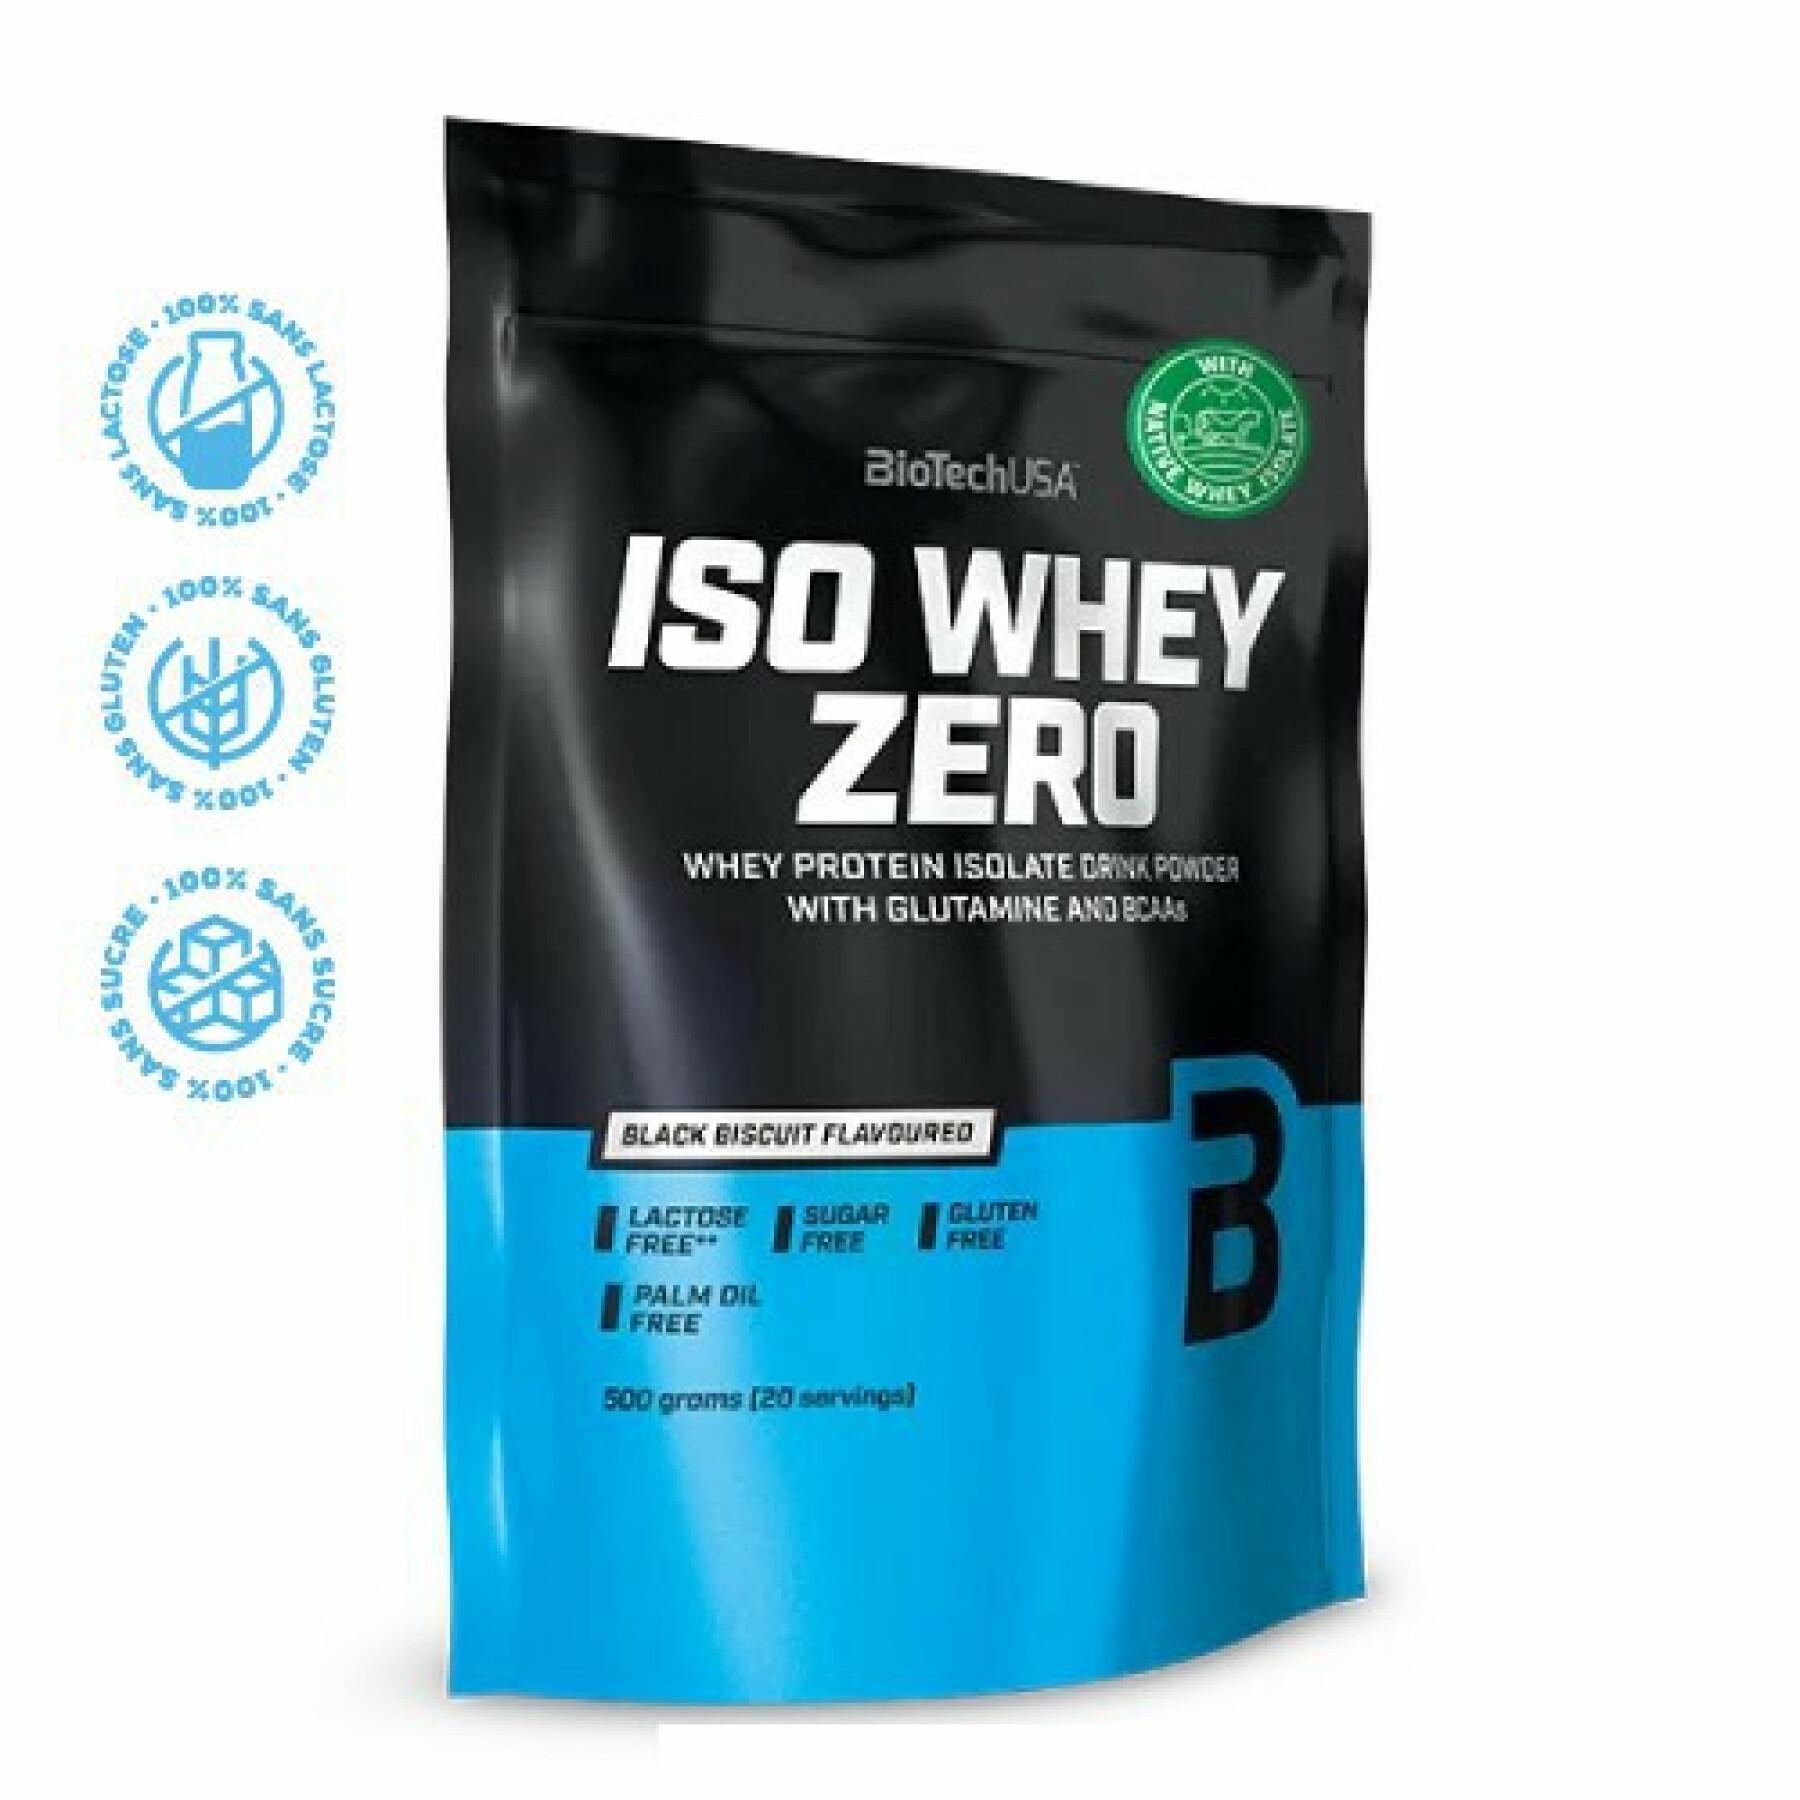 Förpackning med 10 proteinpåsar Biotech USA iso whey zero lactose free - Black Biscuit - 500g